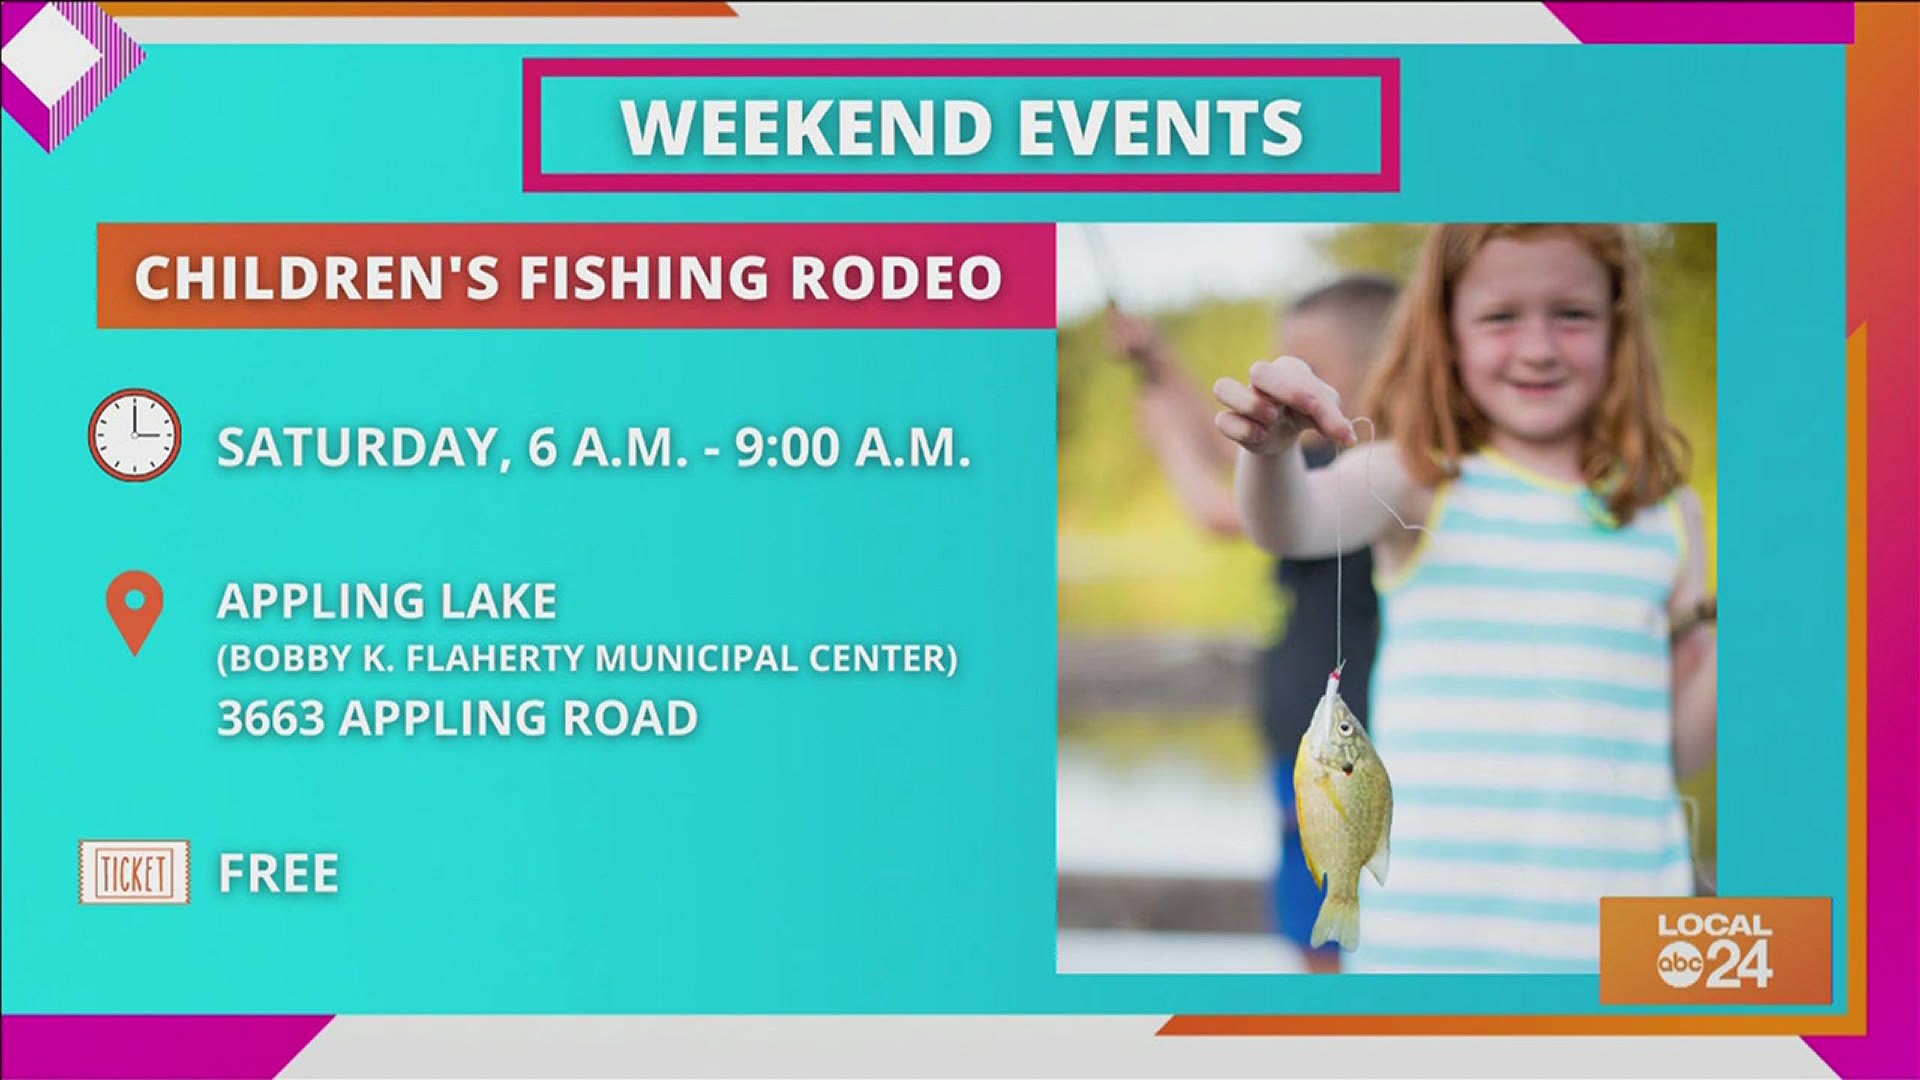 From live music to fishing rodeos, join Sydney Neely as we take a closer look at what Memphis has to offer for Friday, June 11th and Saturday, June 12th for free!